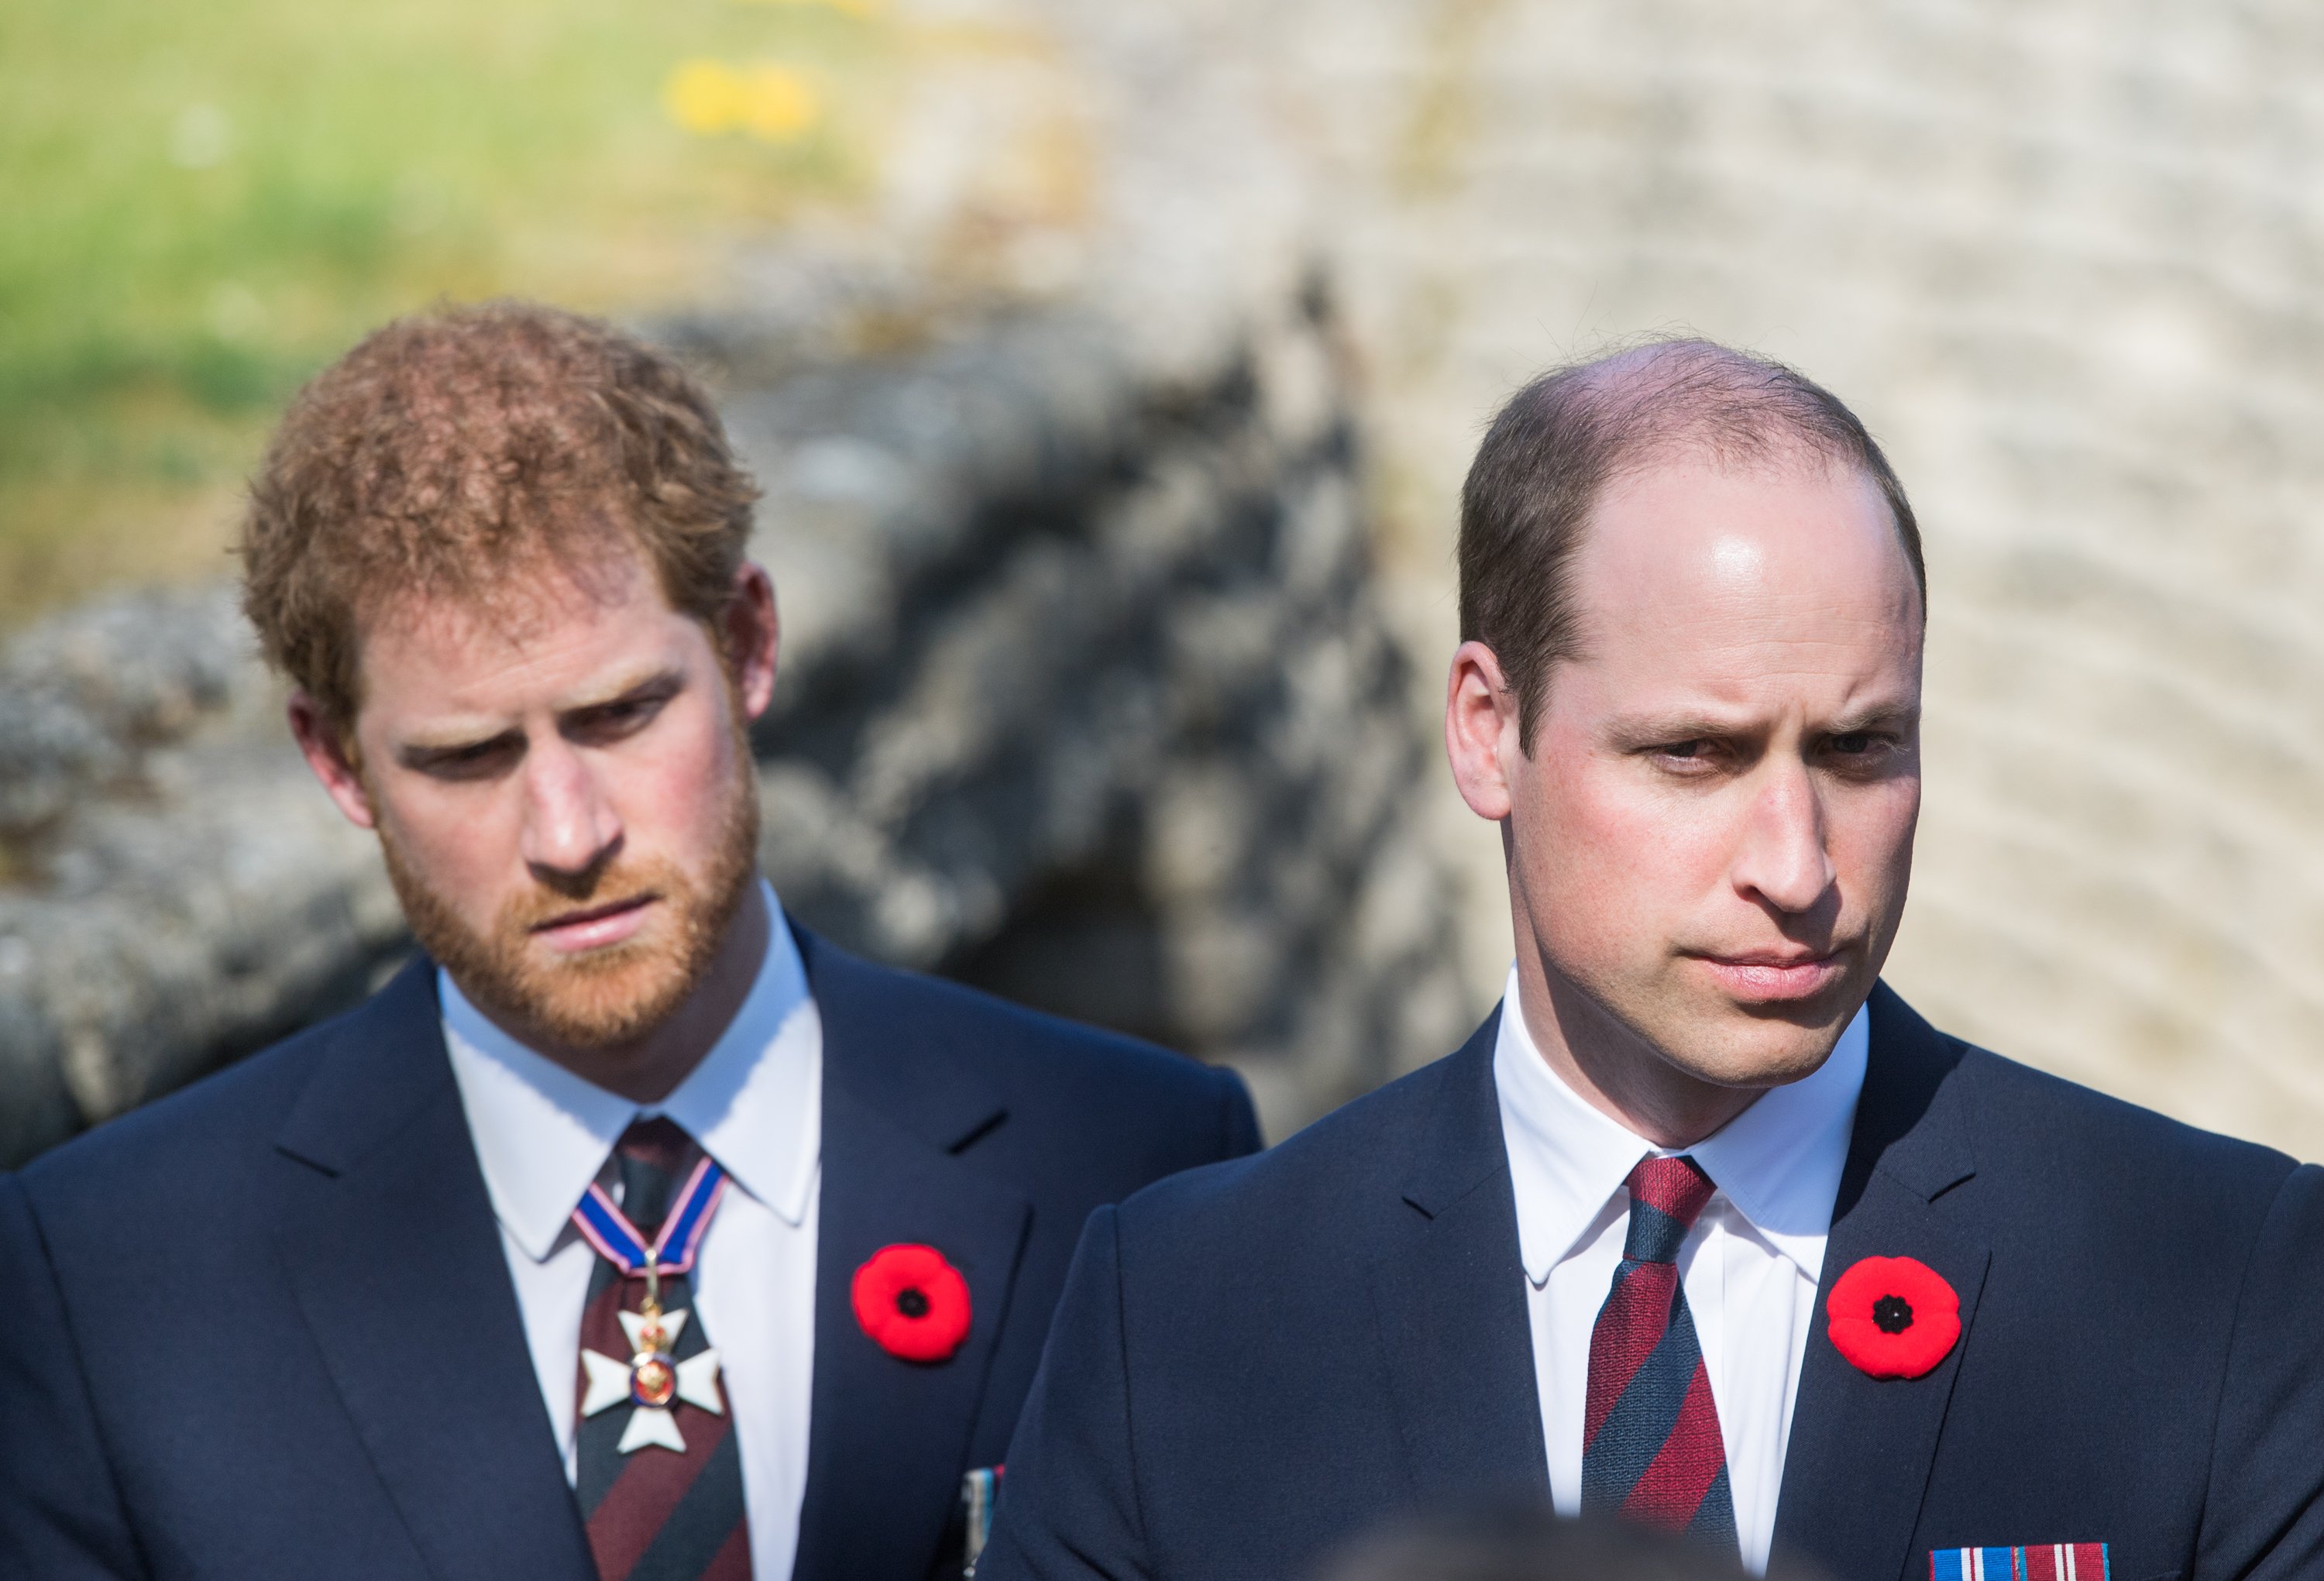 Prince William, Duke of Cambridge and Prince Harry, Duke of Sussex during commemorations of the 100th anniversary of the Battle of Vimy Ridge on April 9, 2017 in Lille, France.  |  Source: Getty Images